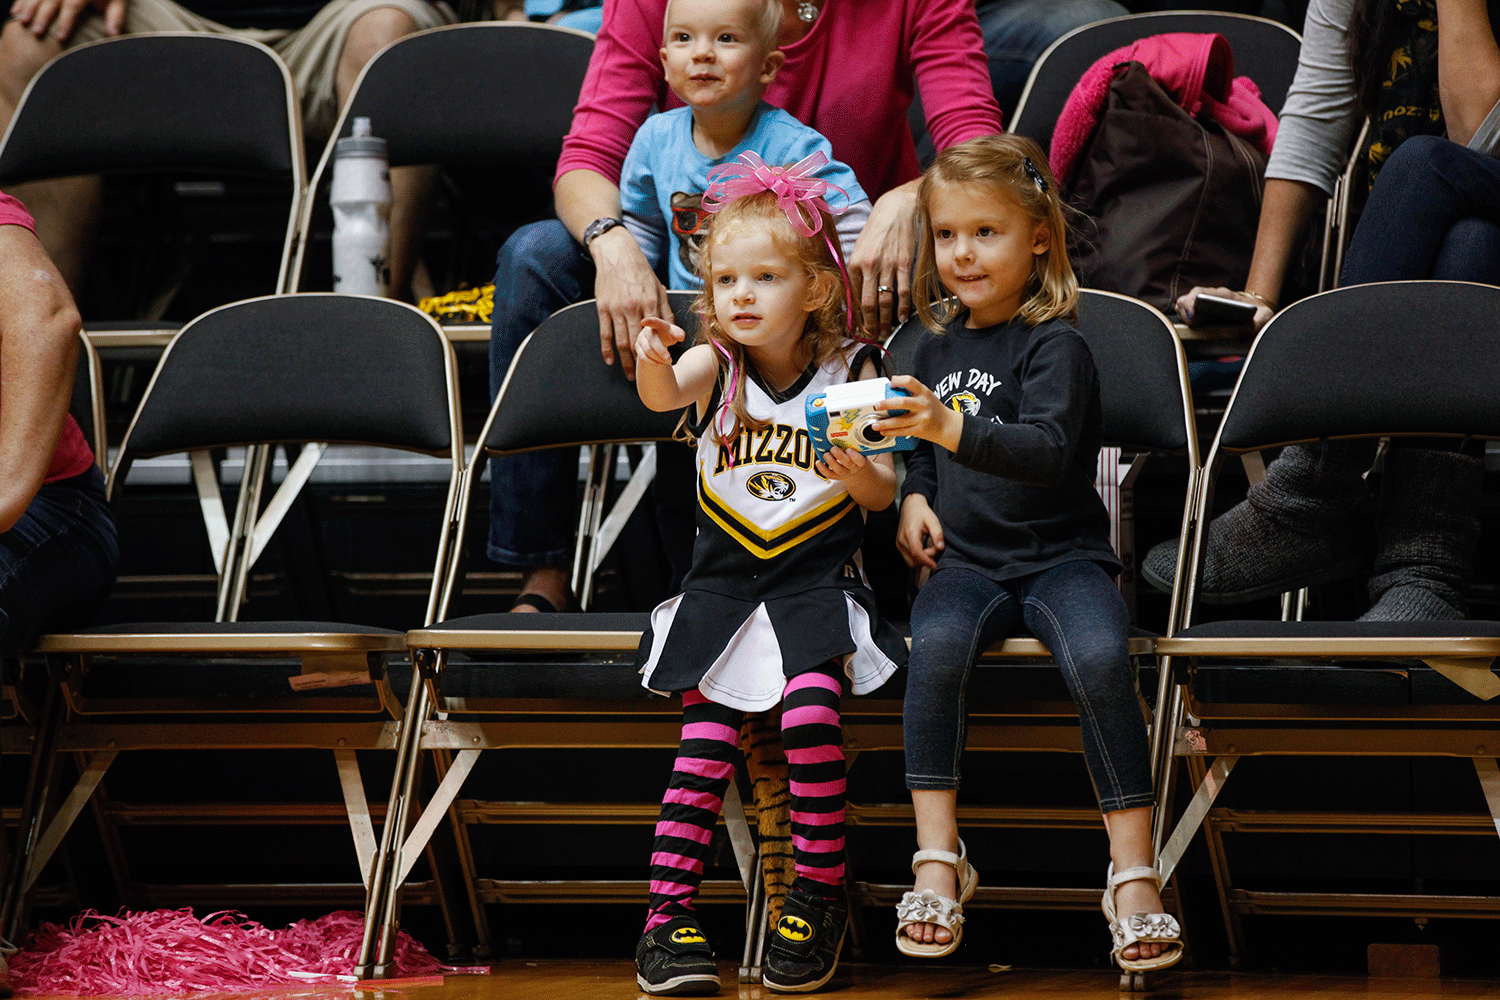 Annabelle Nelson, 4, and Summer Smith, 4, take photos and discuss the game courtside during the third set.